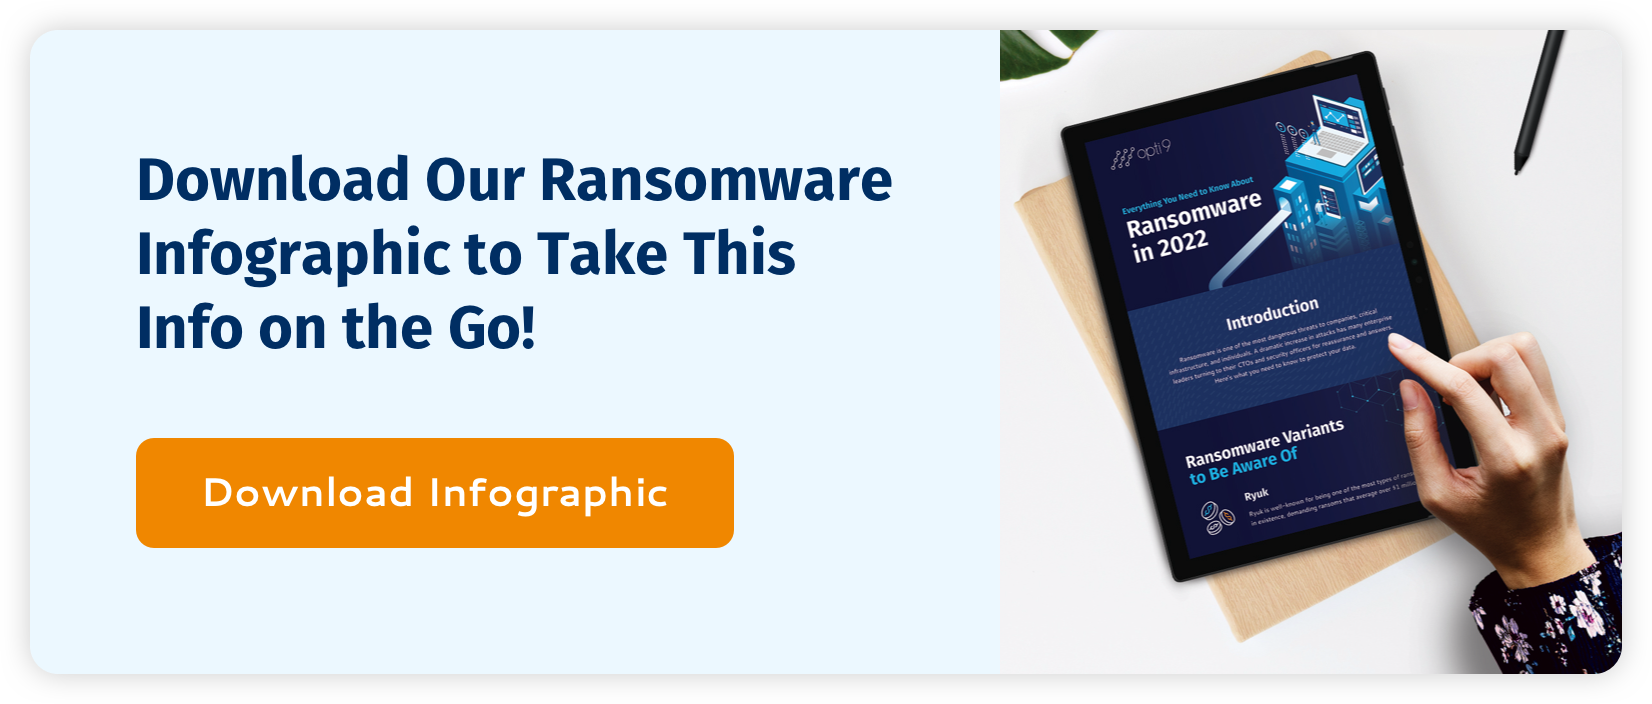 Download our Ransomware Infographic to take this info on the go